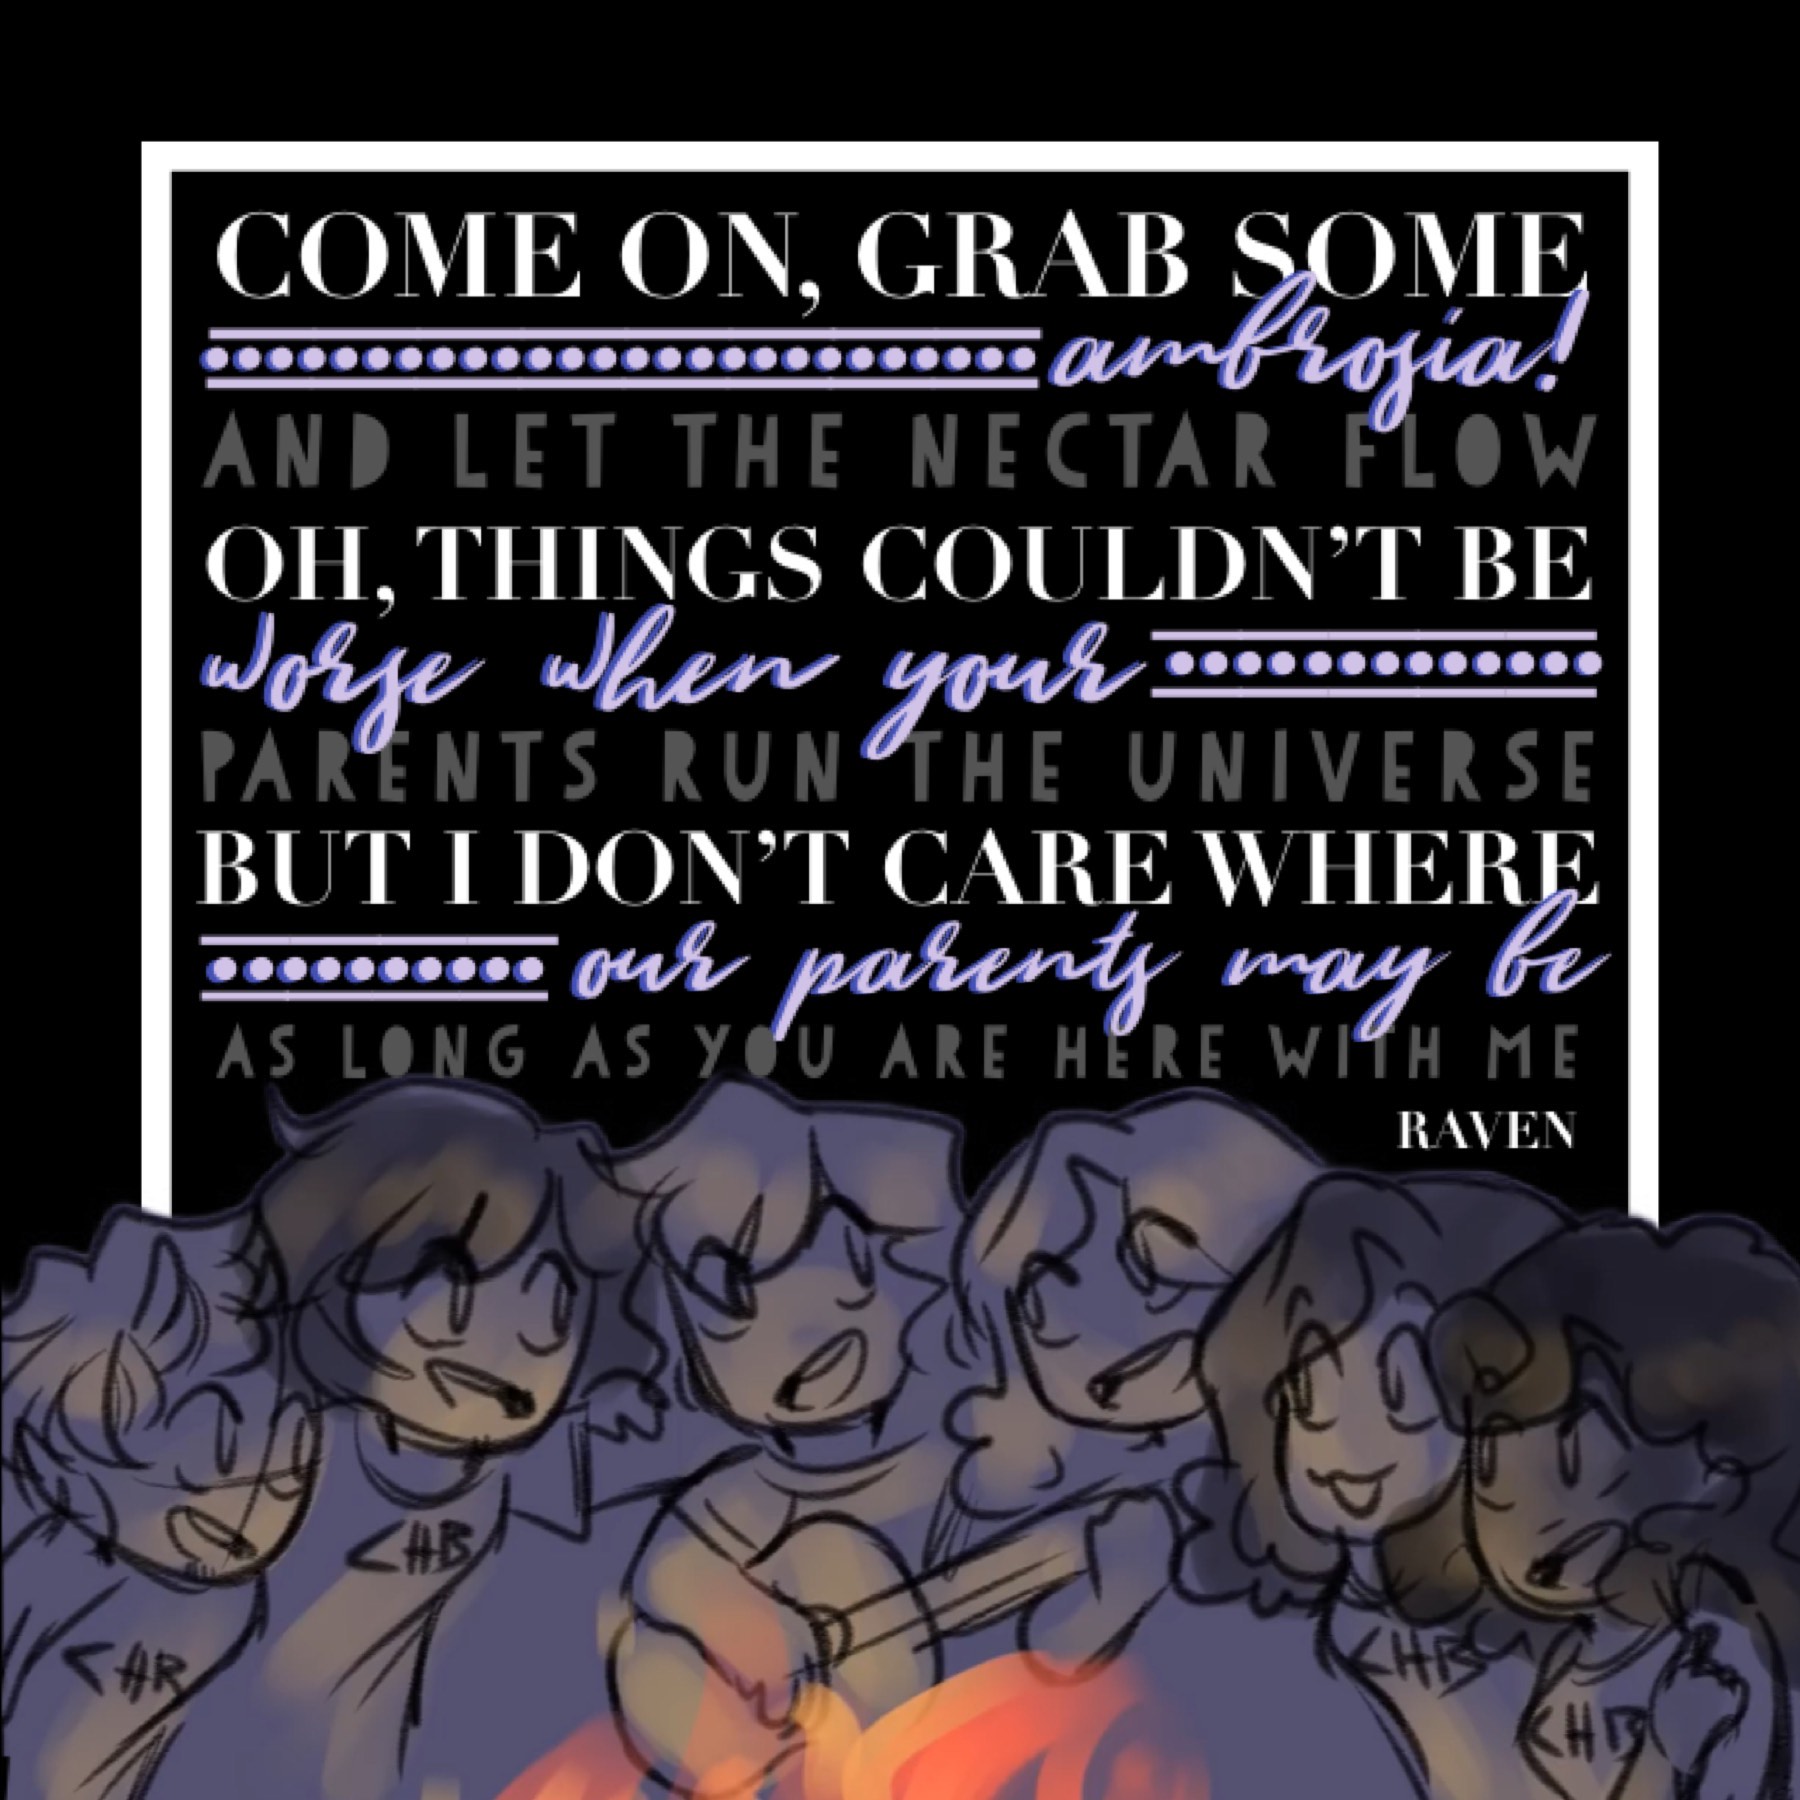 another campfire song collage oOp
i promise i’m working on a collage that’s not in this style ok-
i have an absolutely insane amount of homework to do and i’ve done absolutely none of it so that’s great,,
anyways how r you all??
comments :)